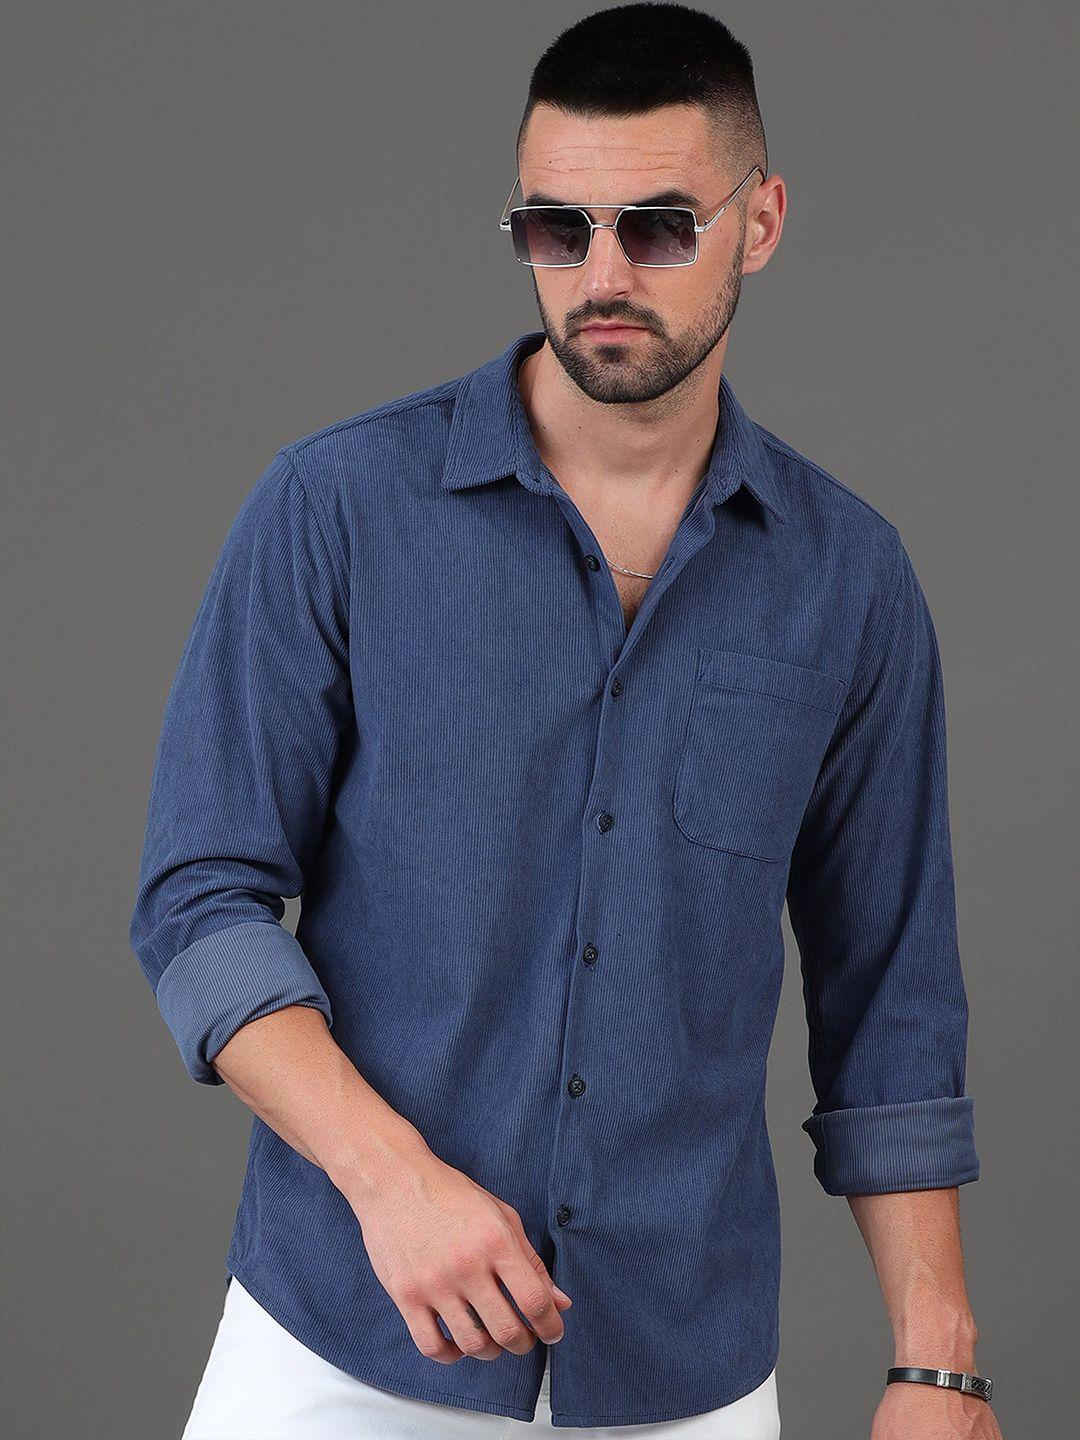 here&now slim fit long sleeves spread collar casual shirt